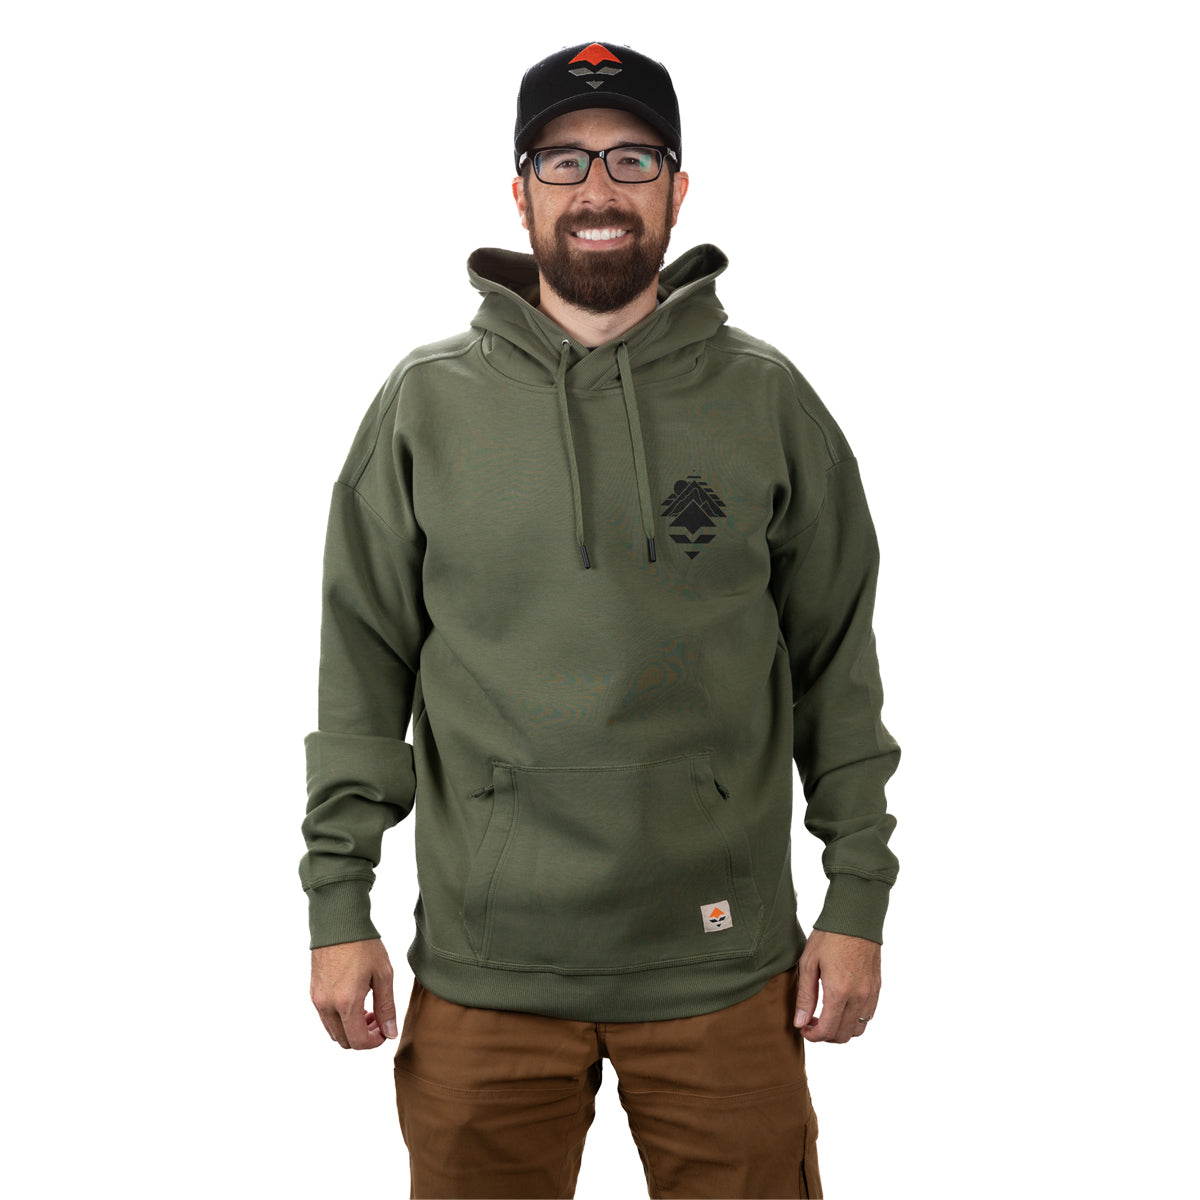 GOHUNT Reflections Hoodie in Muted Olive by GOHUNT | GOHUNT - GOHUNT Shop